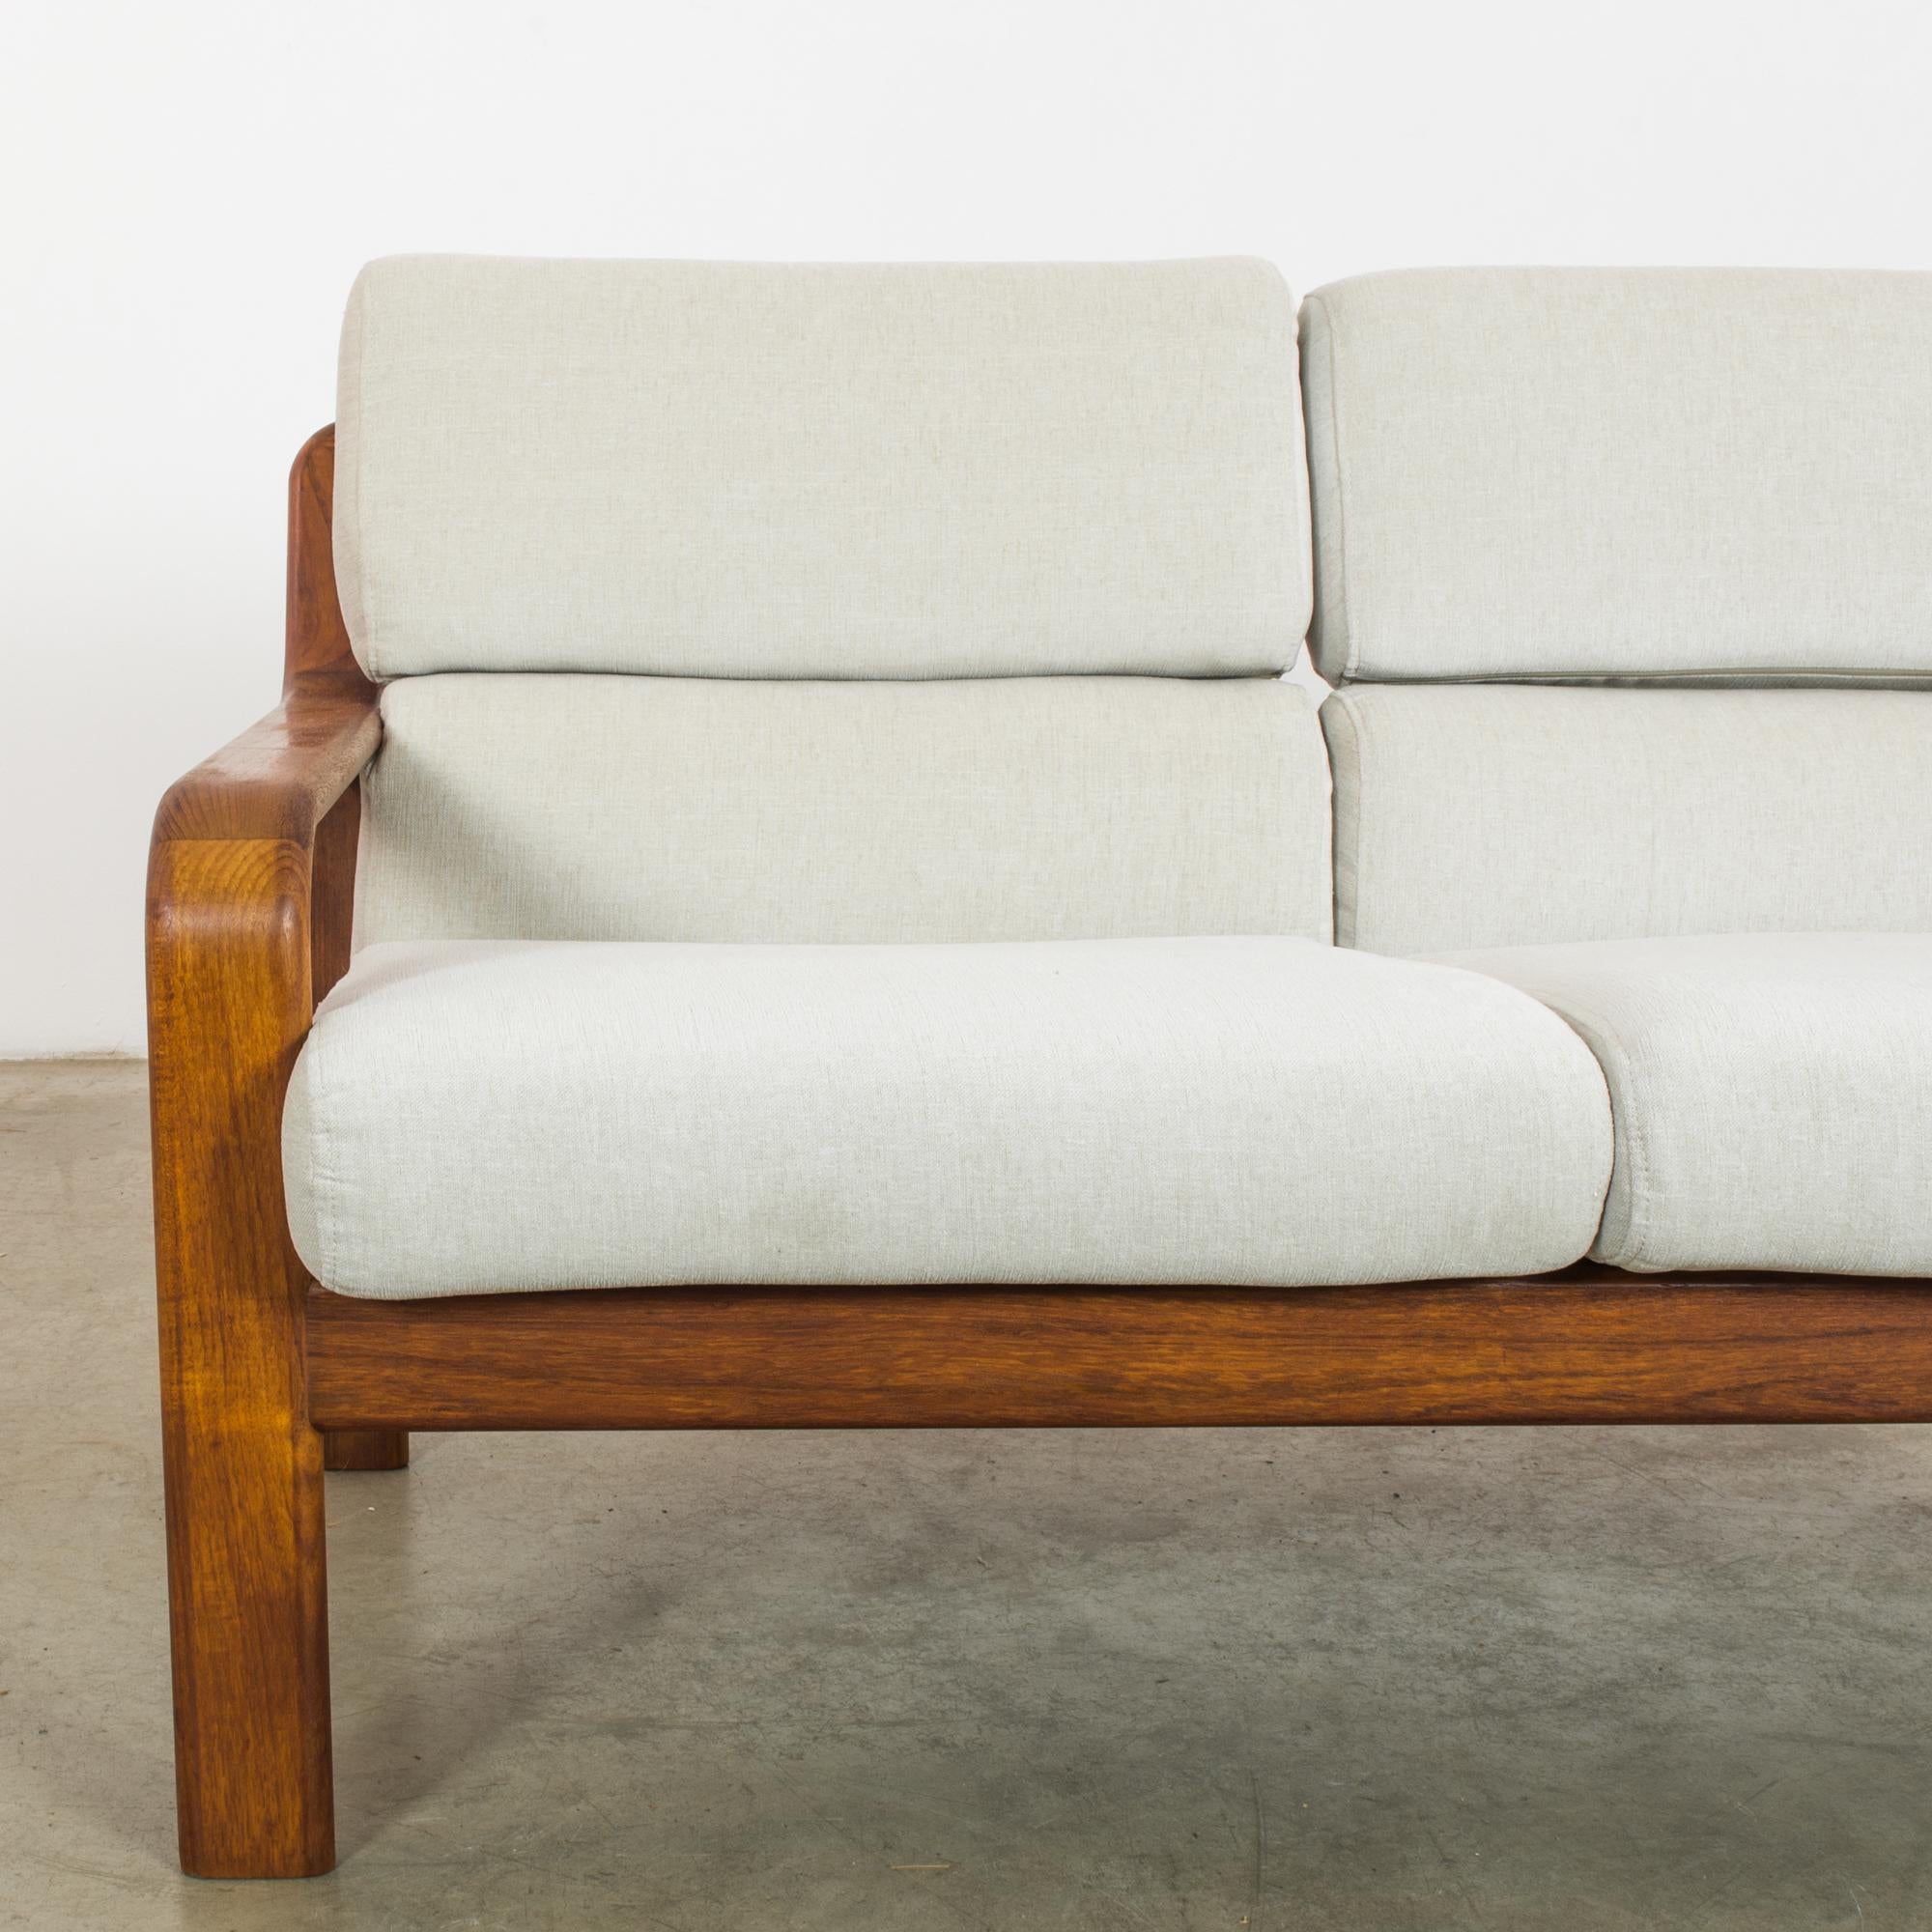 20th Century 1960s Danish Teak Sofa with Upholstered Seat and Back